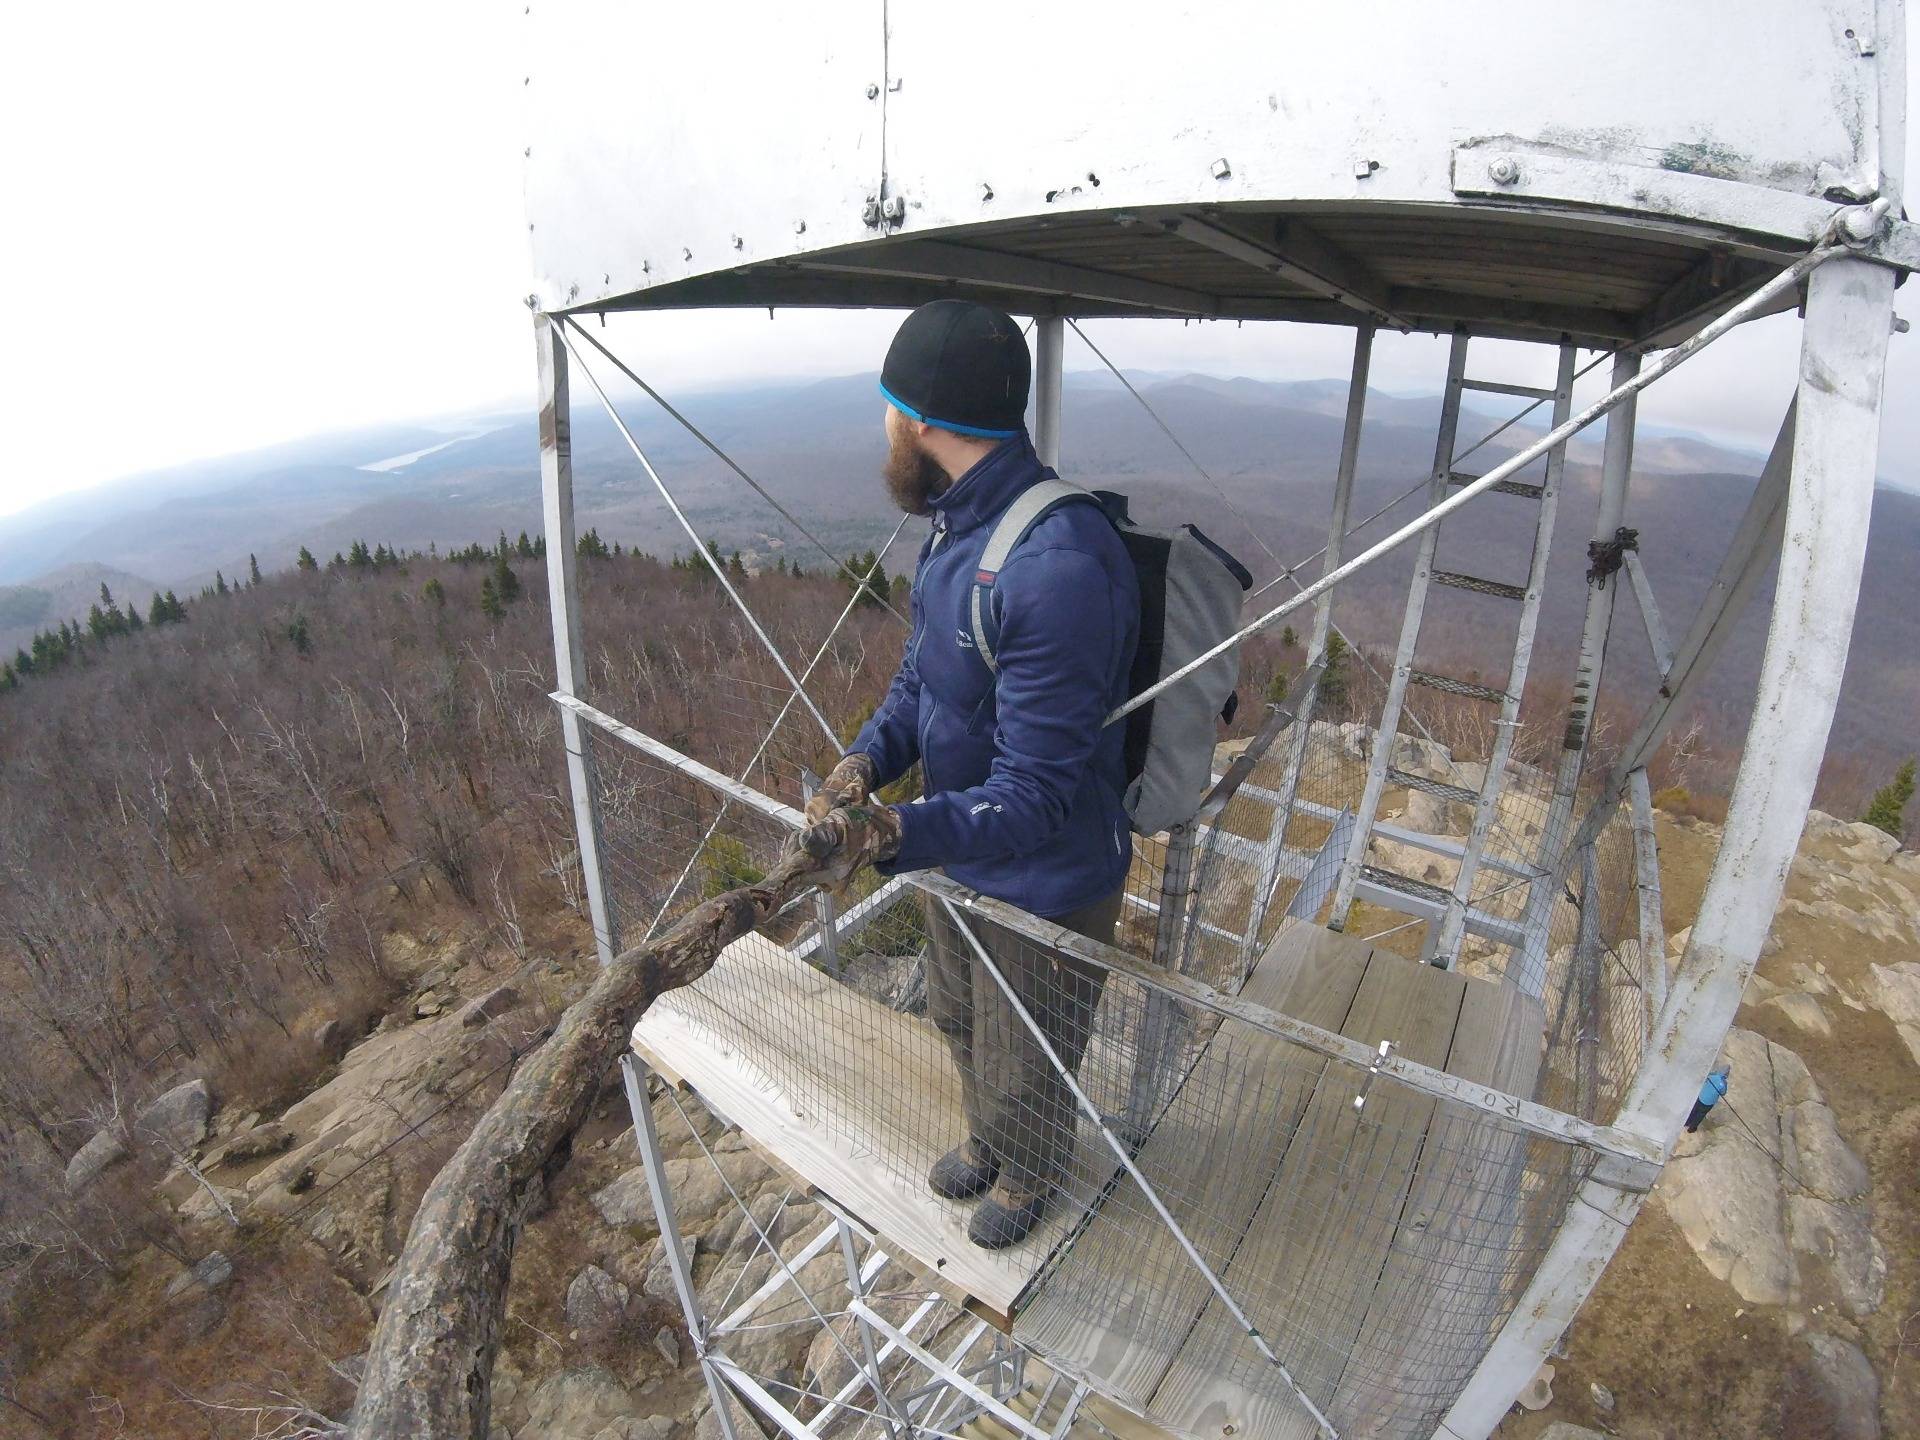 Another fire tower challenge down